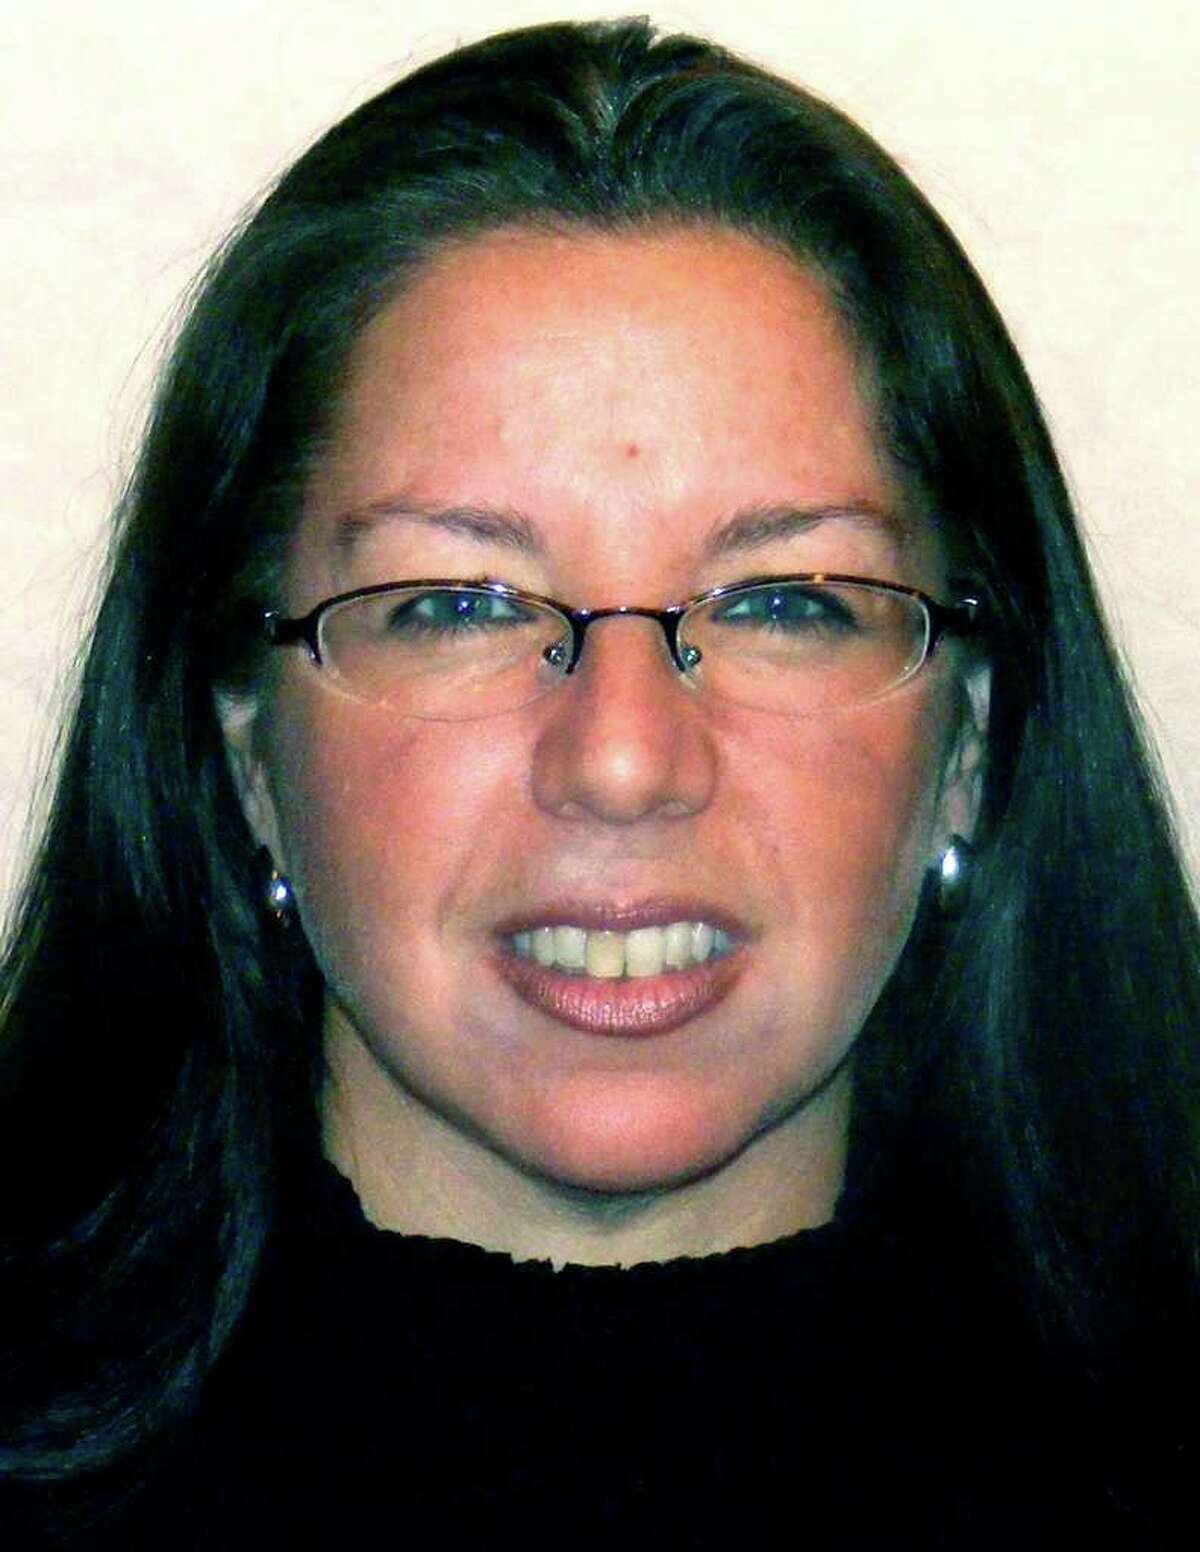 SPECTRUM/Lisa Alexander, Democratic candidate for the Zoning Board of Appeals in New Milford, November 2011